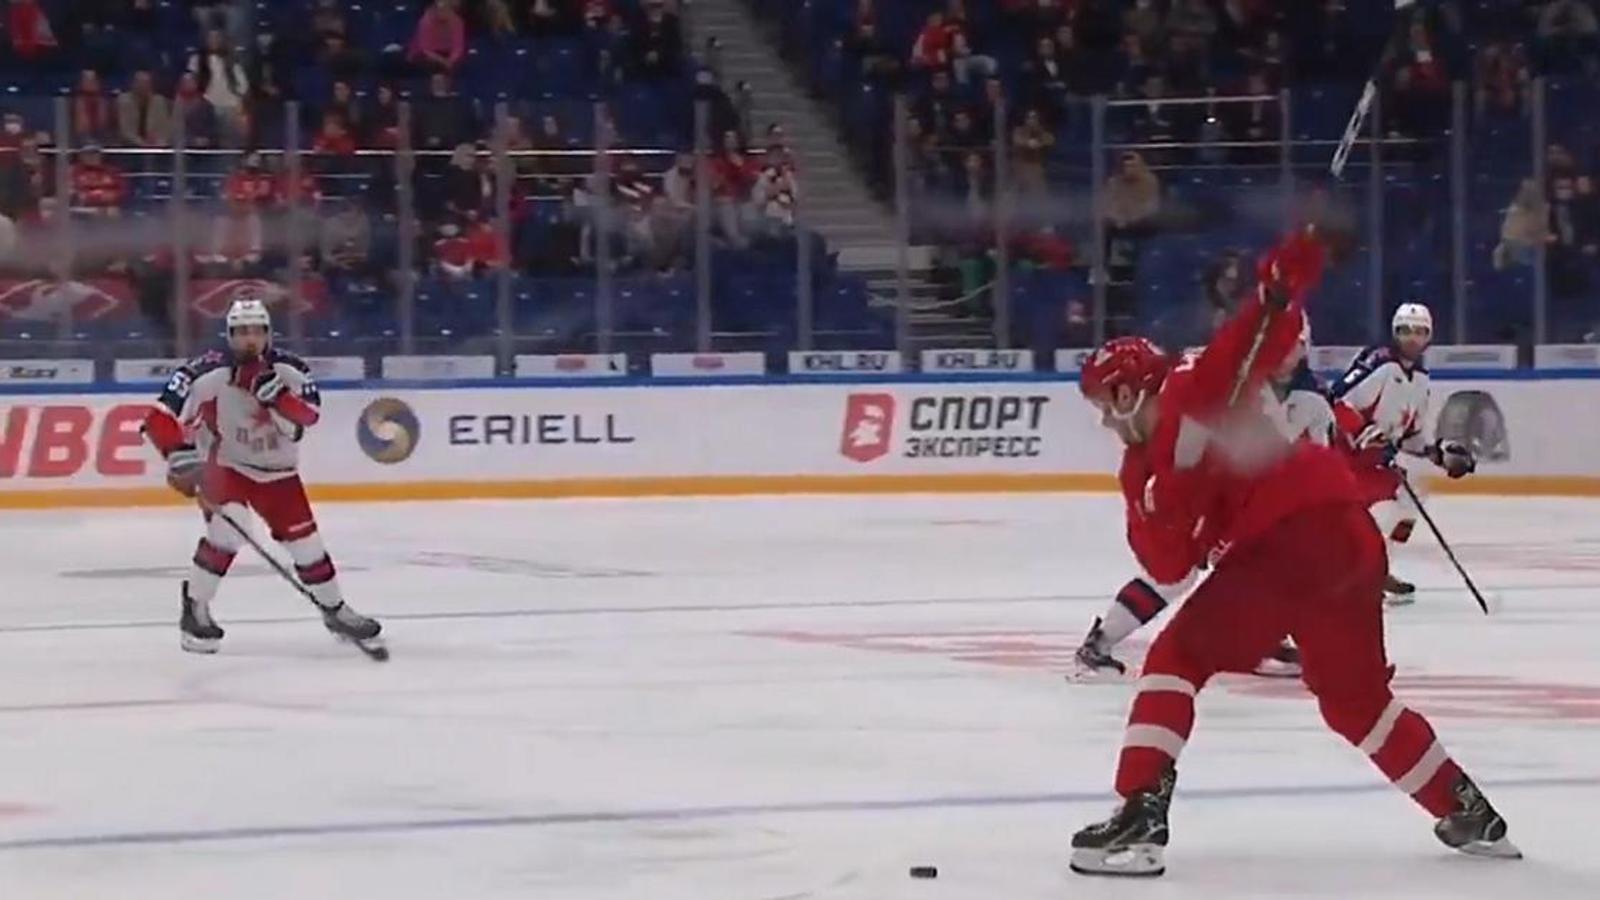 Andrei Kuteikin scores with a bomb from behind his own blue line!